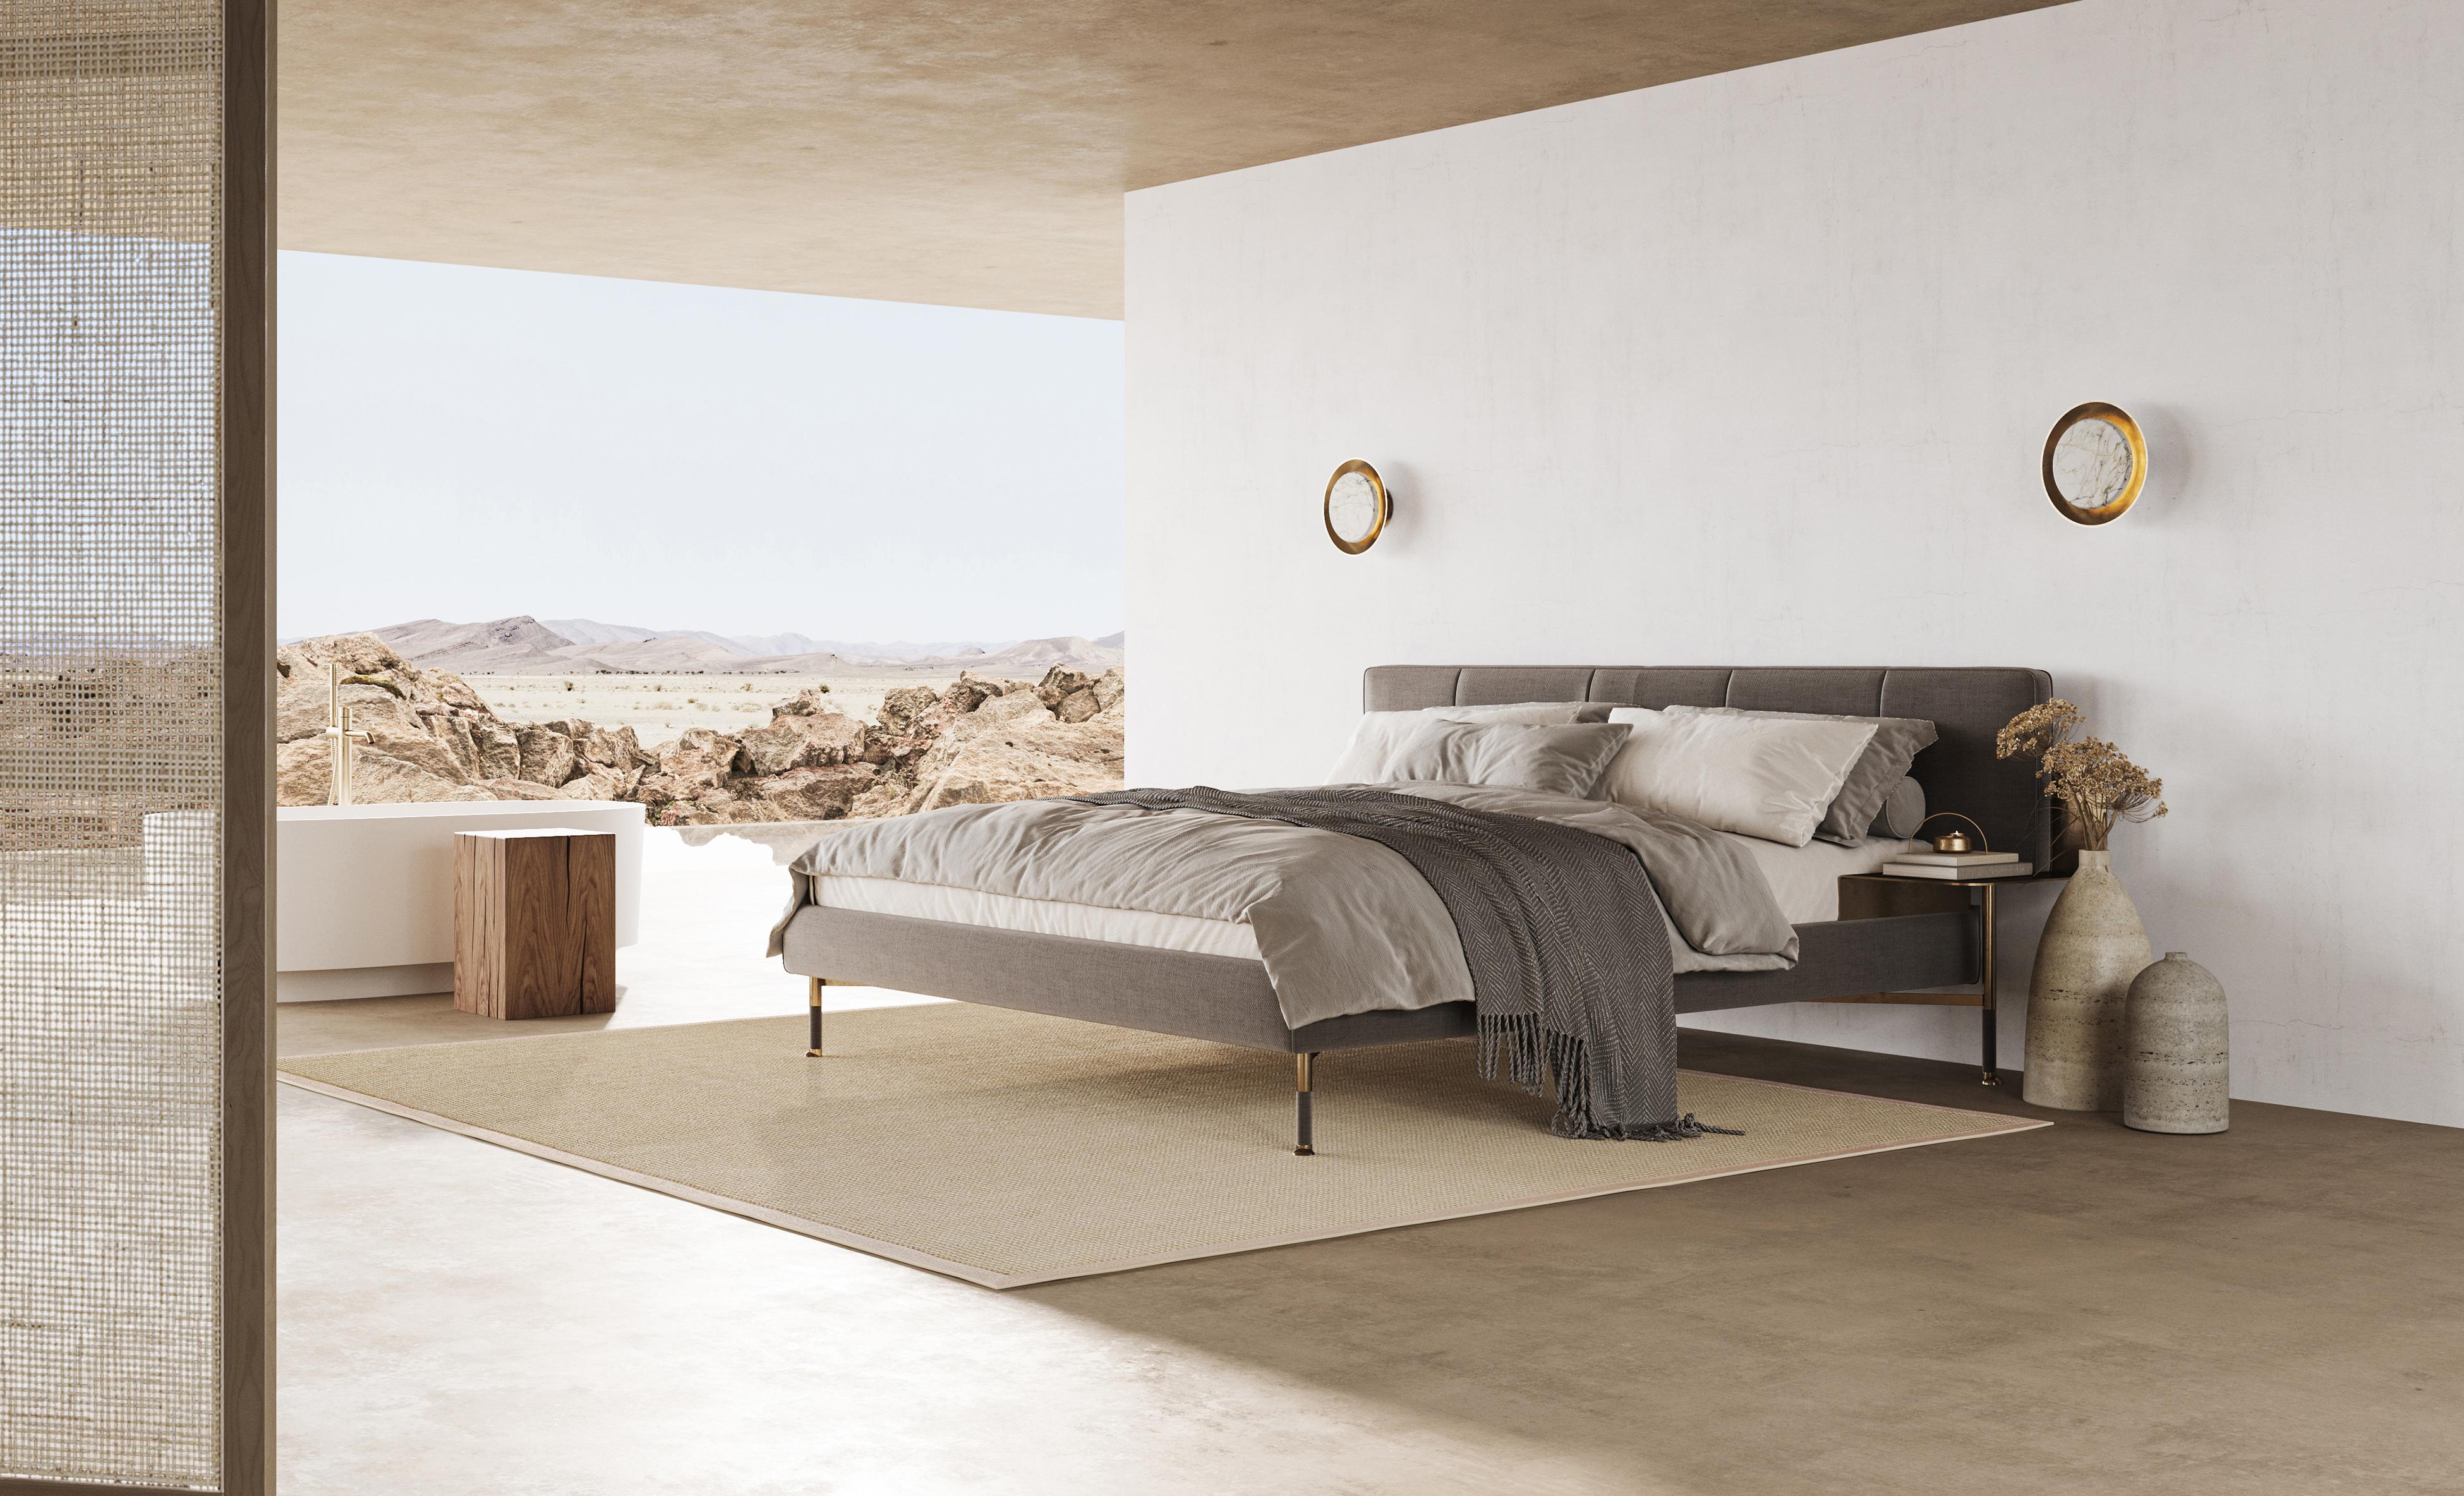 Envelop yourself in the None of My Business Bed, with a layered balance of materials that both dominate a space and blend in. Designed with a floating aesthetic that leaves a space feeling open, the bed is delicate in its appearance but structurally